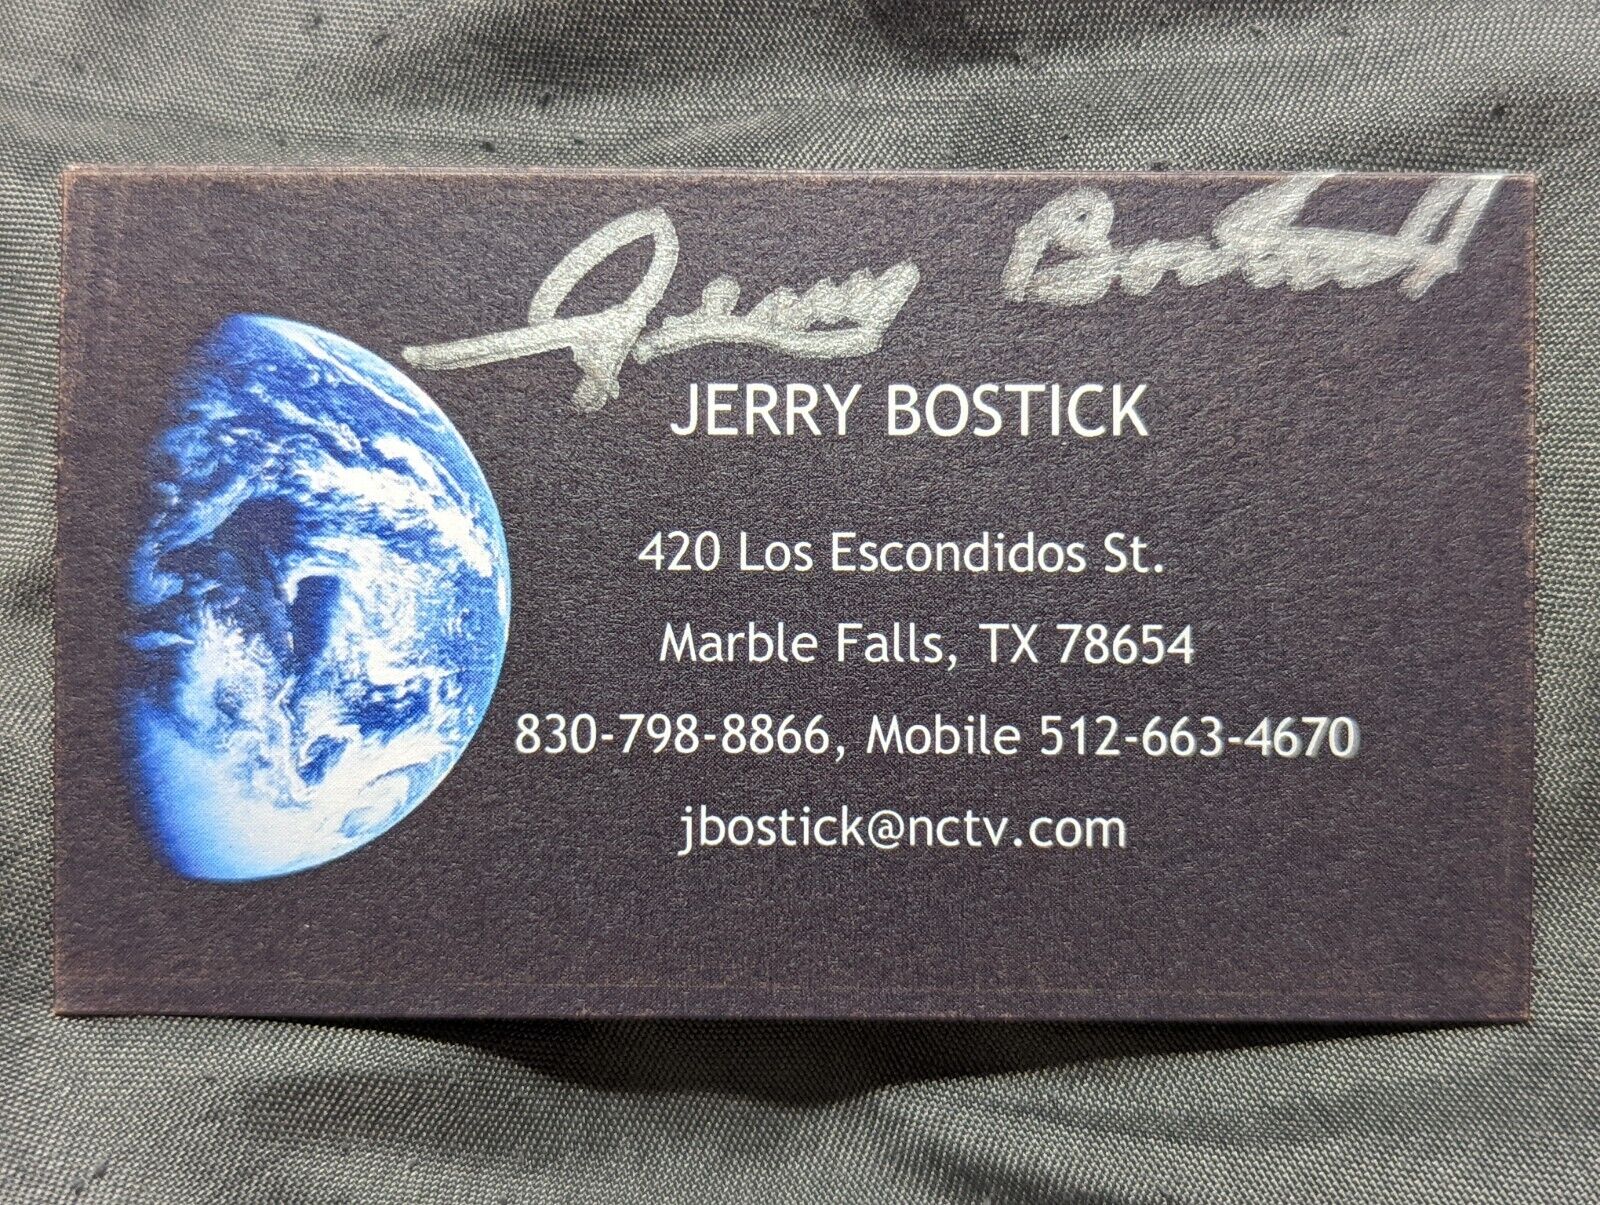 JERRY BOSTICK Signed Business Card APOLLO 13 FLIGHT CONTROLLER AUTOGRAPH 